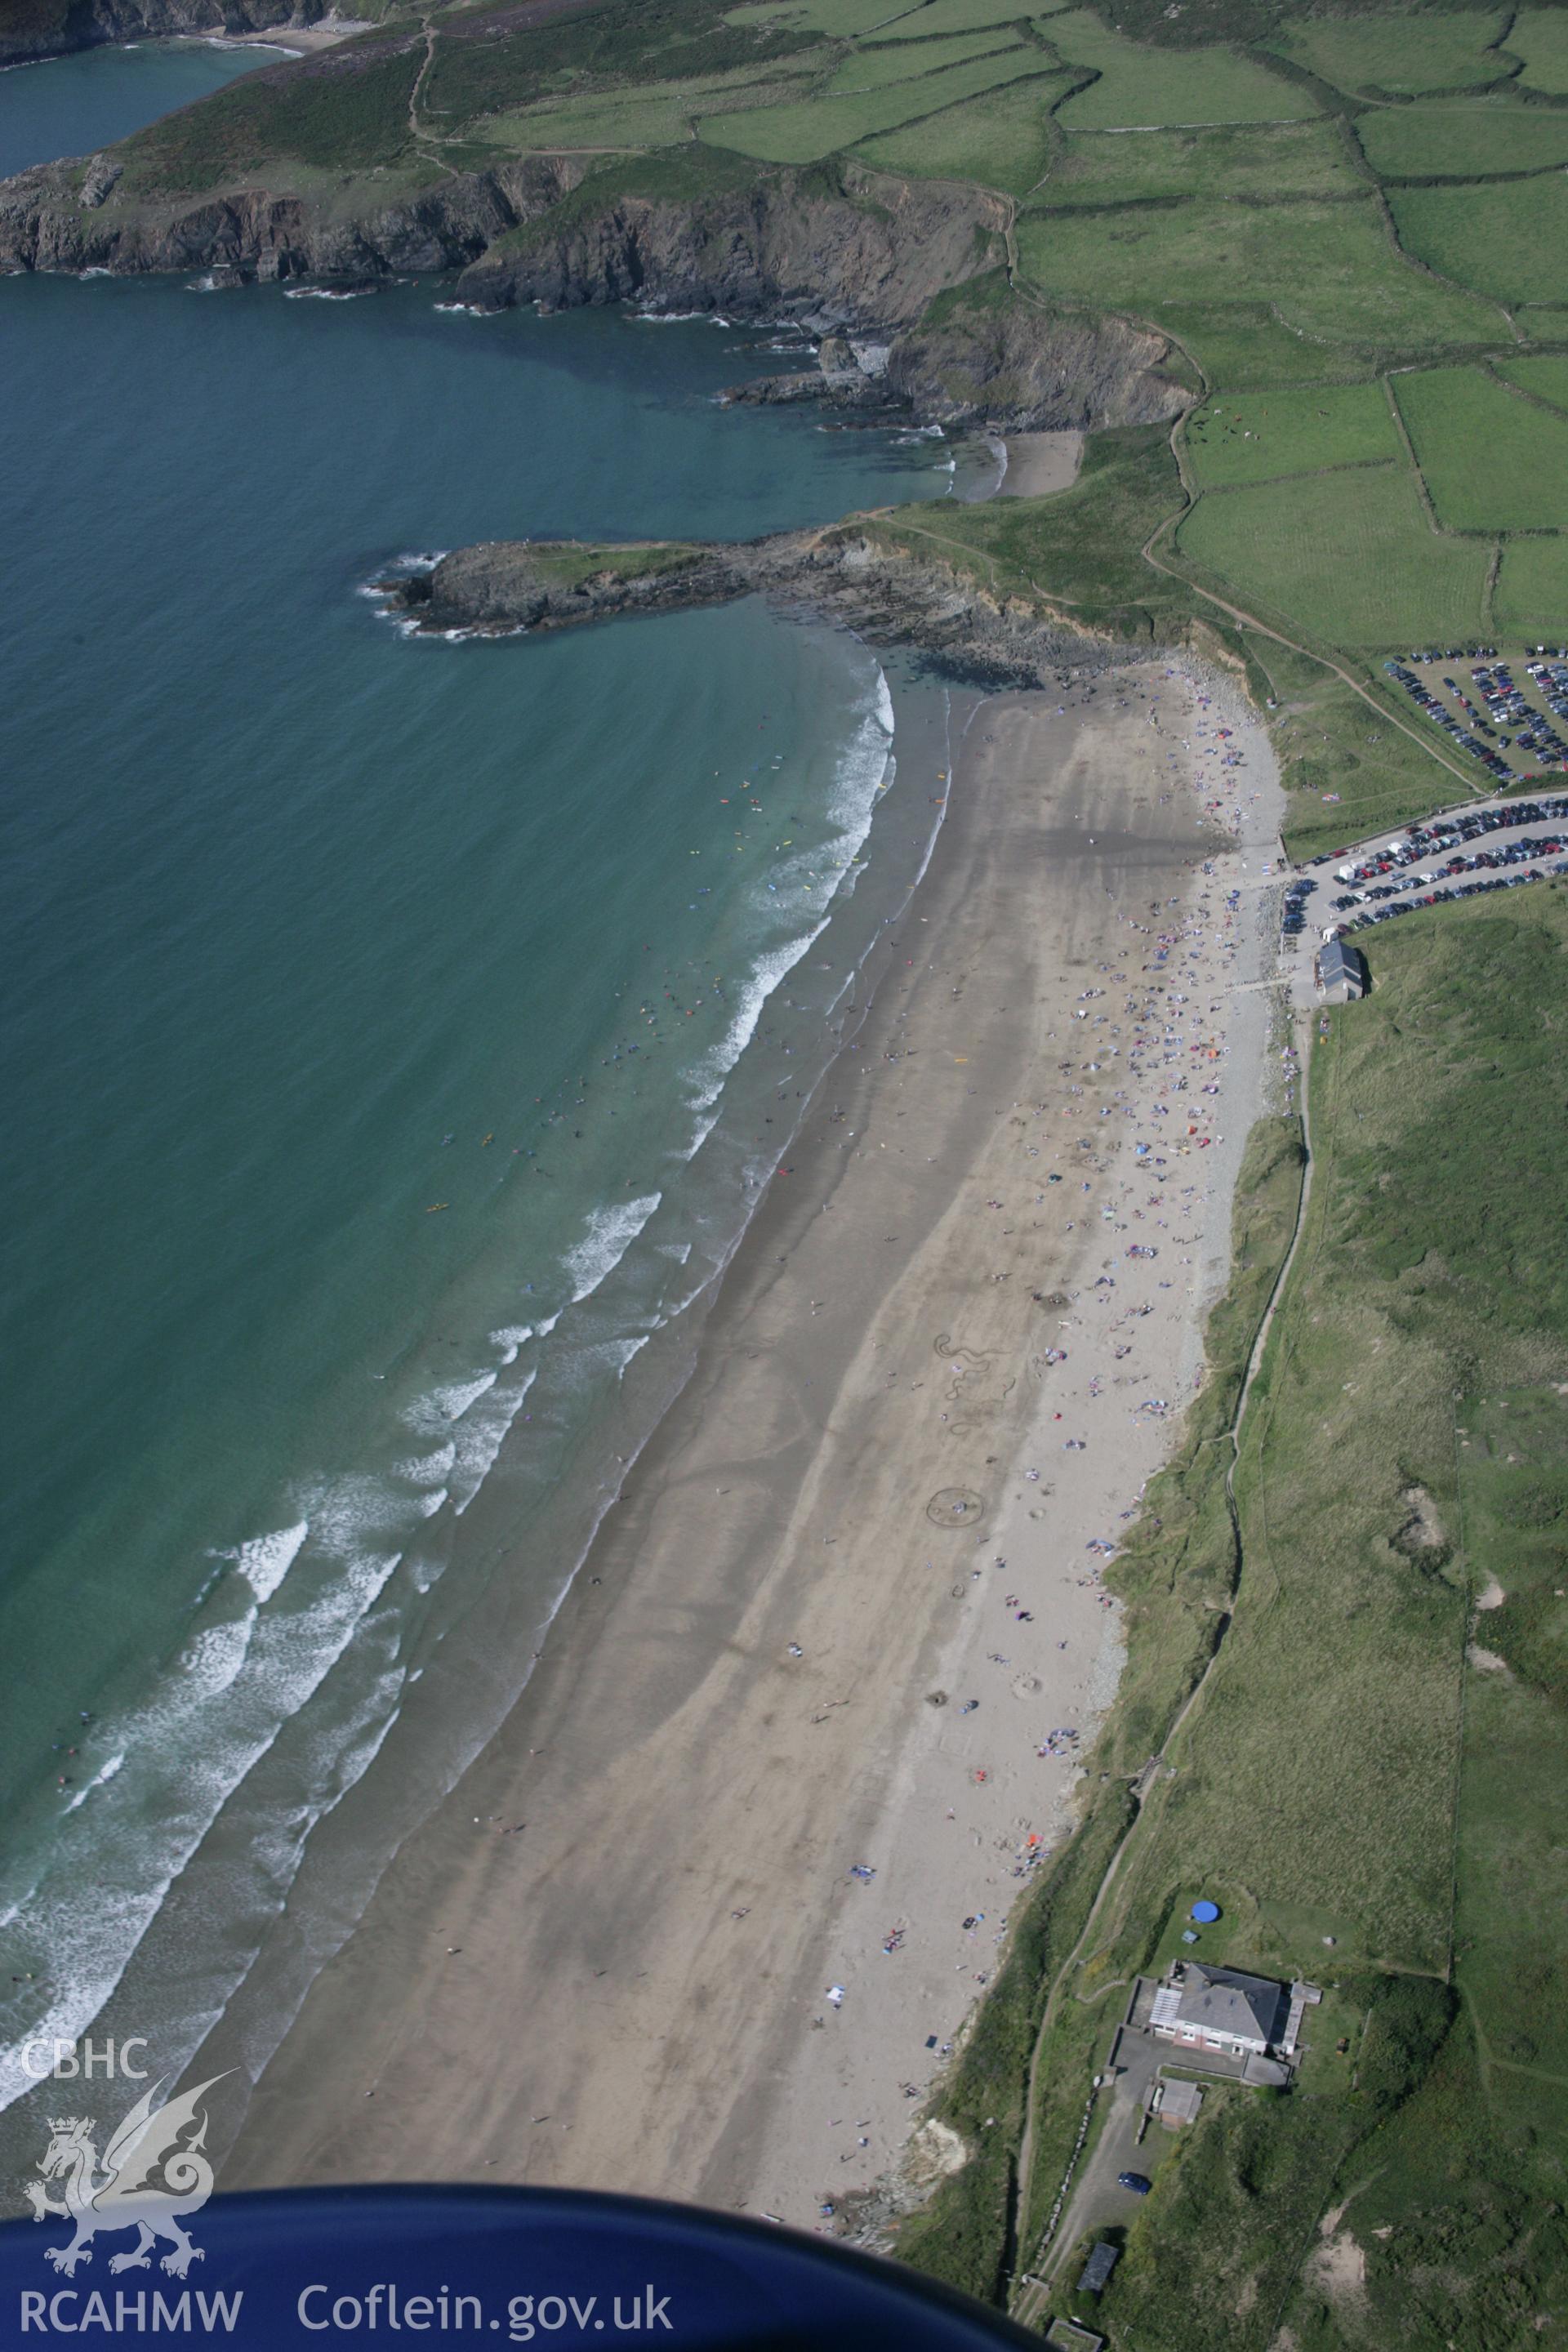 RCAHMW digital colour oblique photograph of Whitesands Bay viewed from the south. Taken on 01/09/2005 by T.G. Driver.